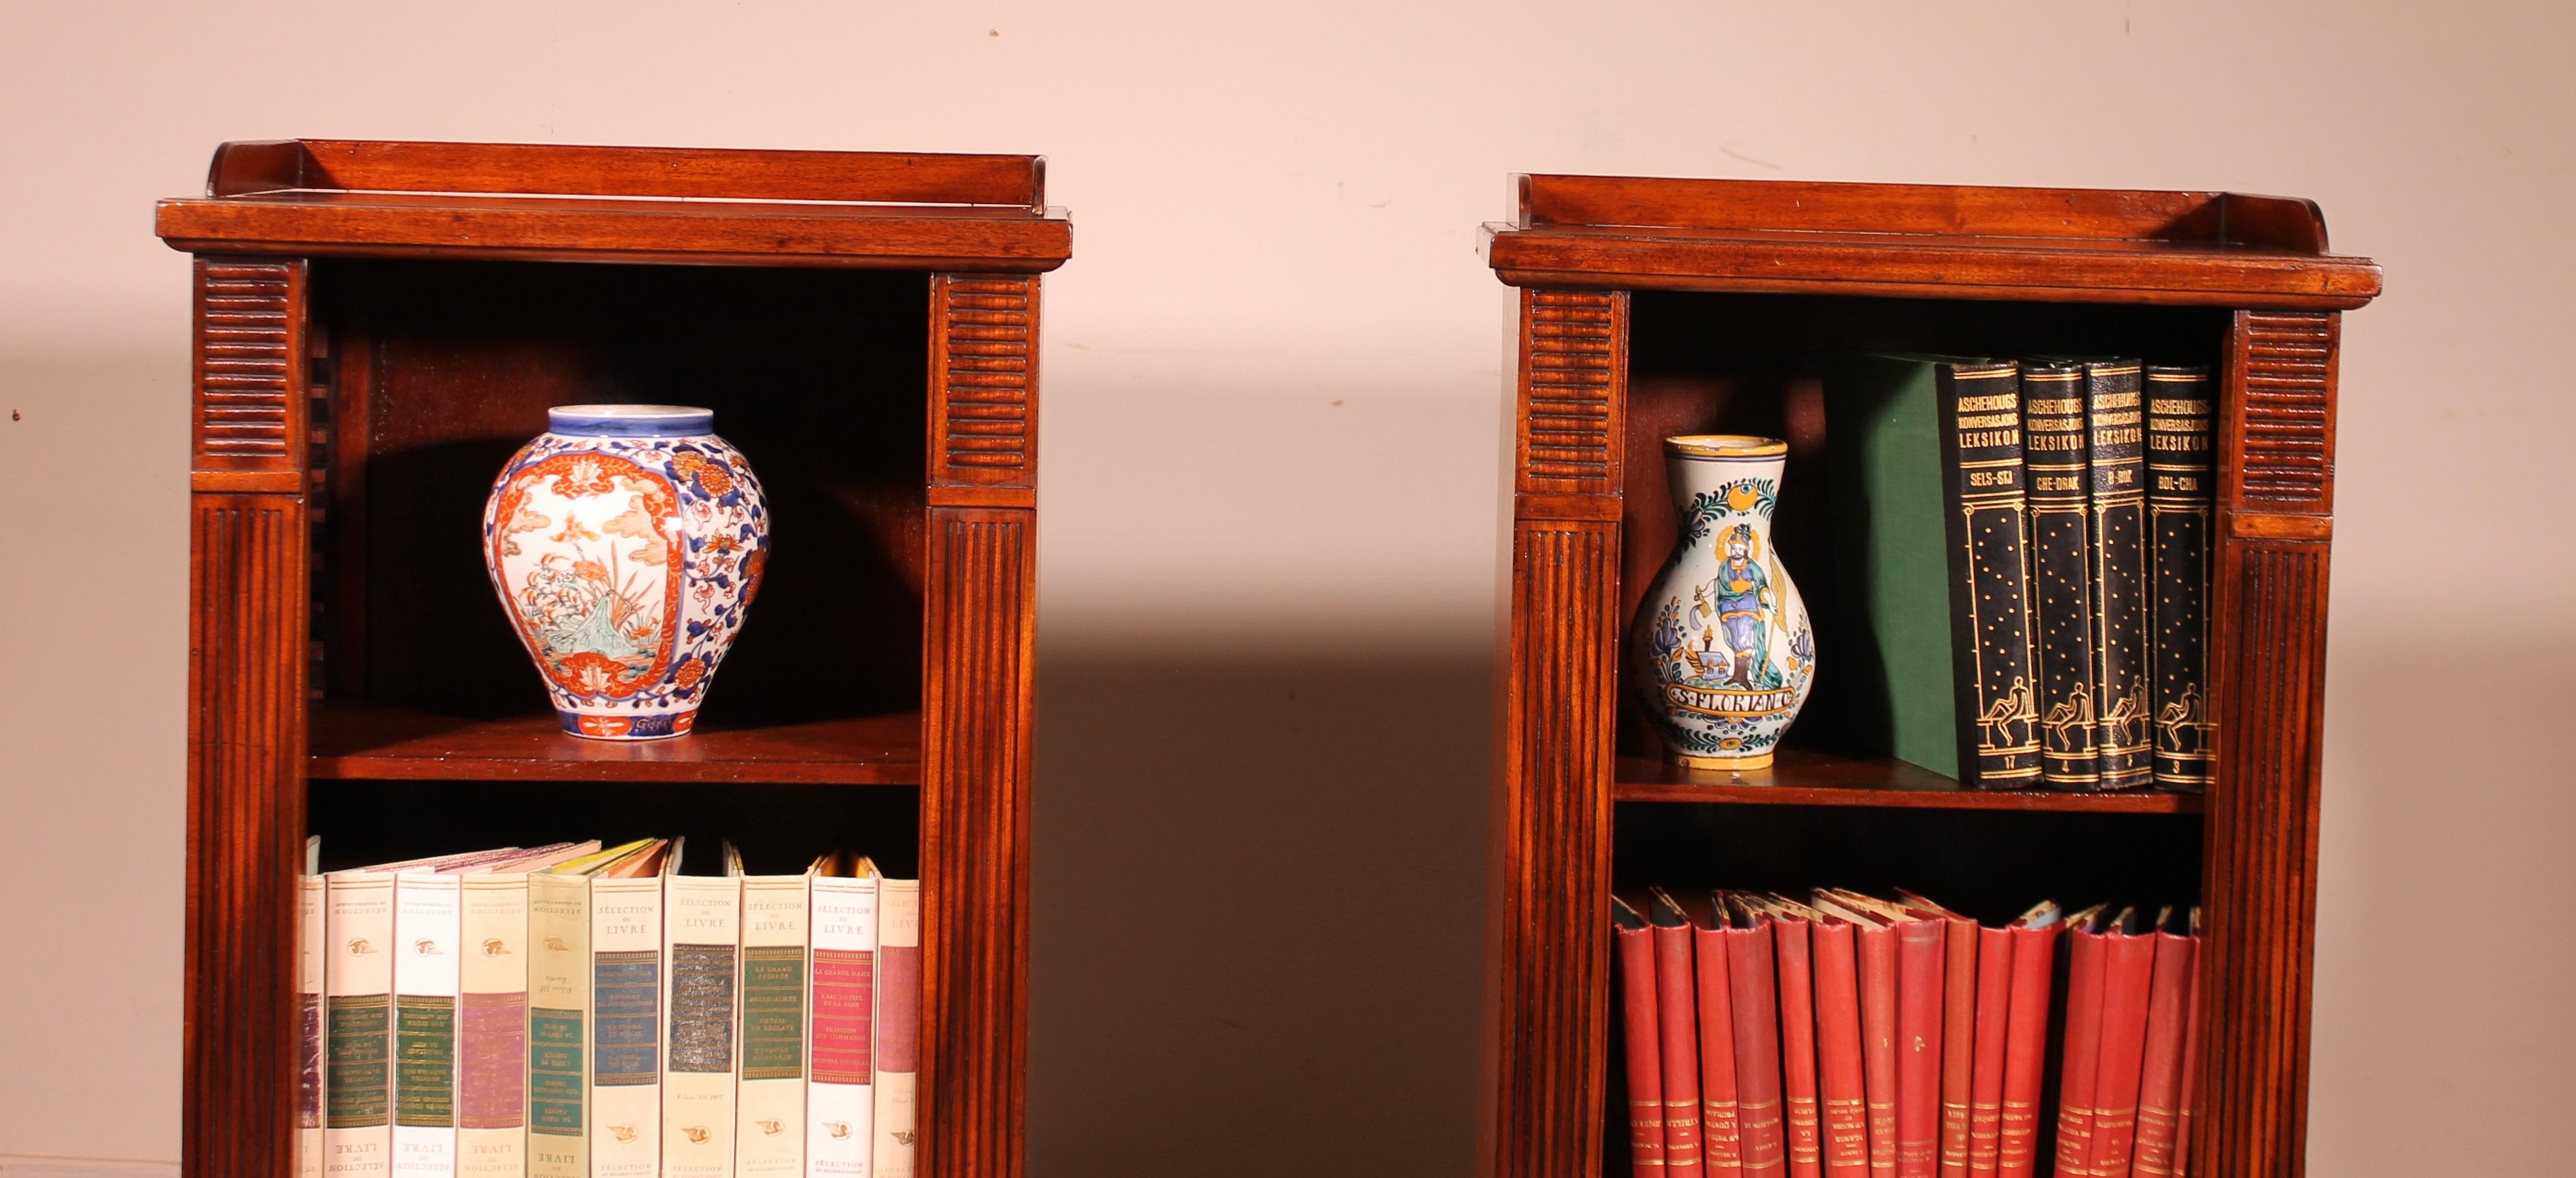 British Pair of Open Bookcases from the Beginning of the 19th Century, William IV